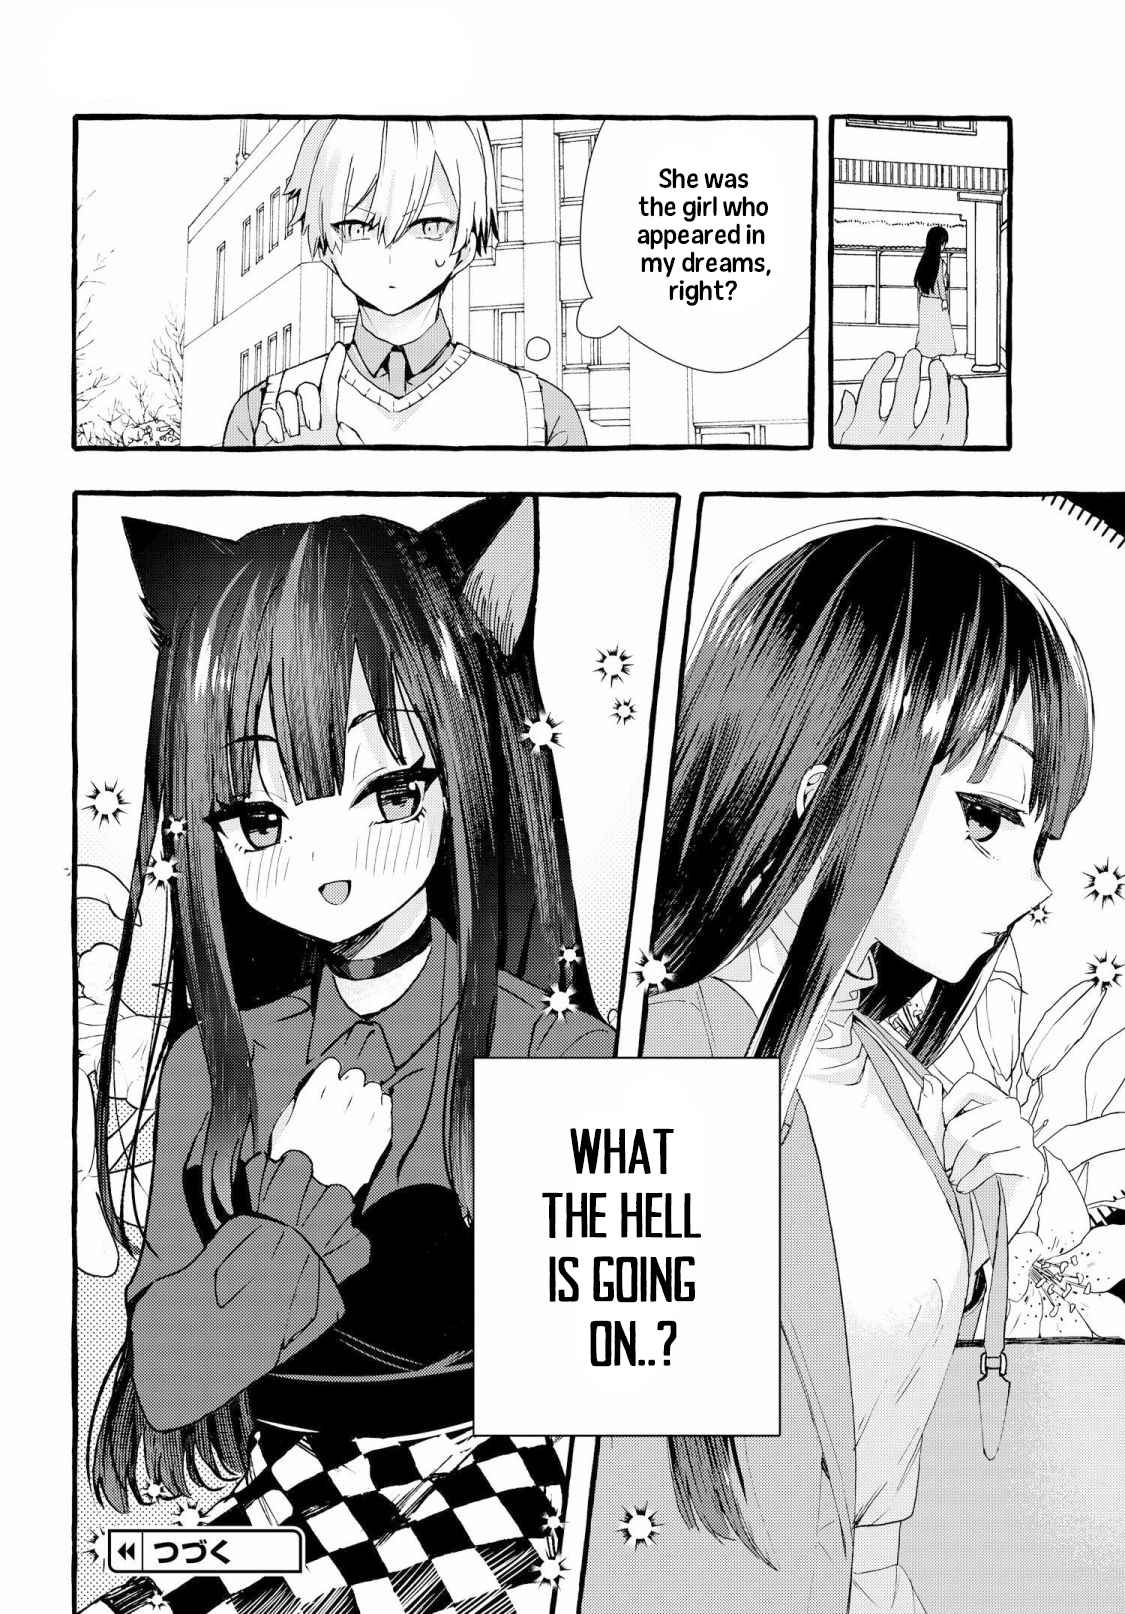 Read The Cold Beauty At School Became My Pet Cat Manga English [New Chapters]  Online Free - MangaClash